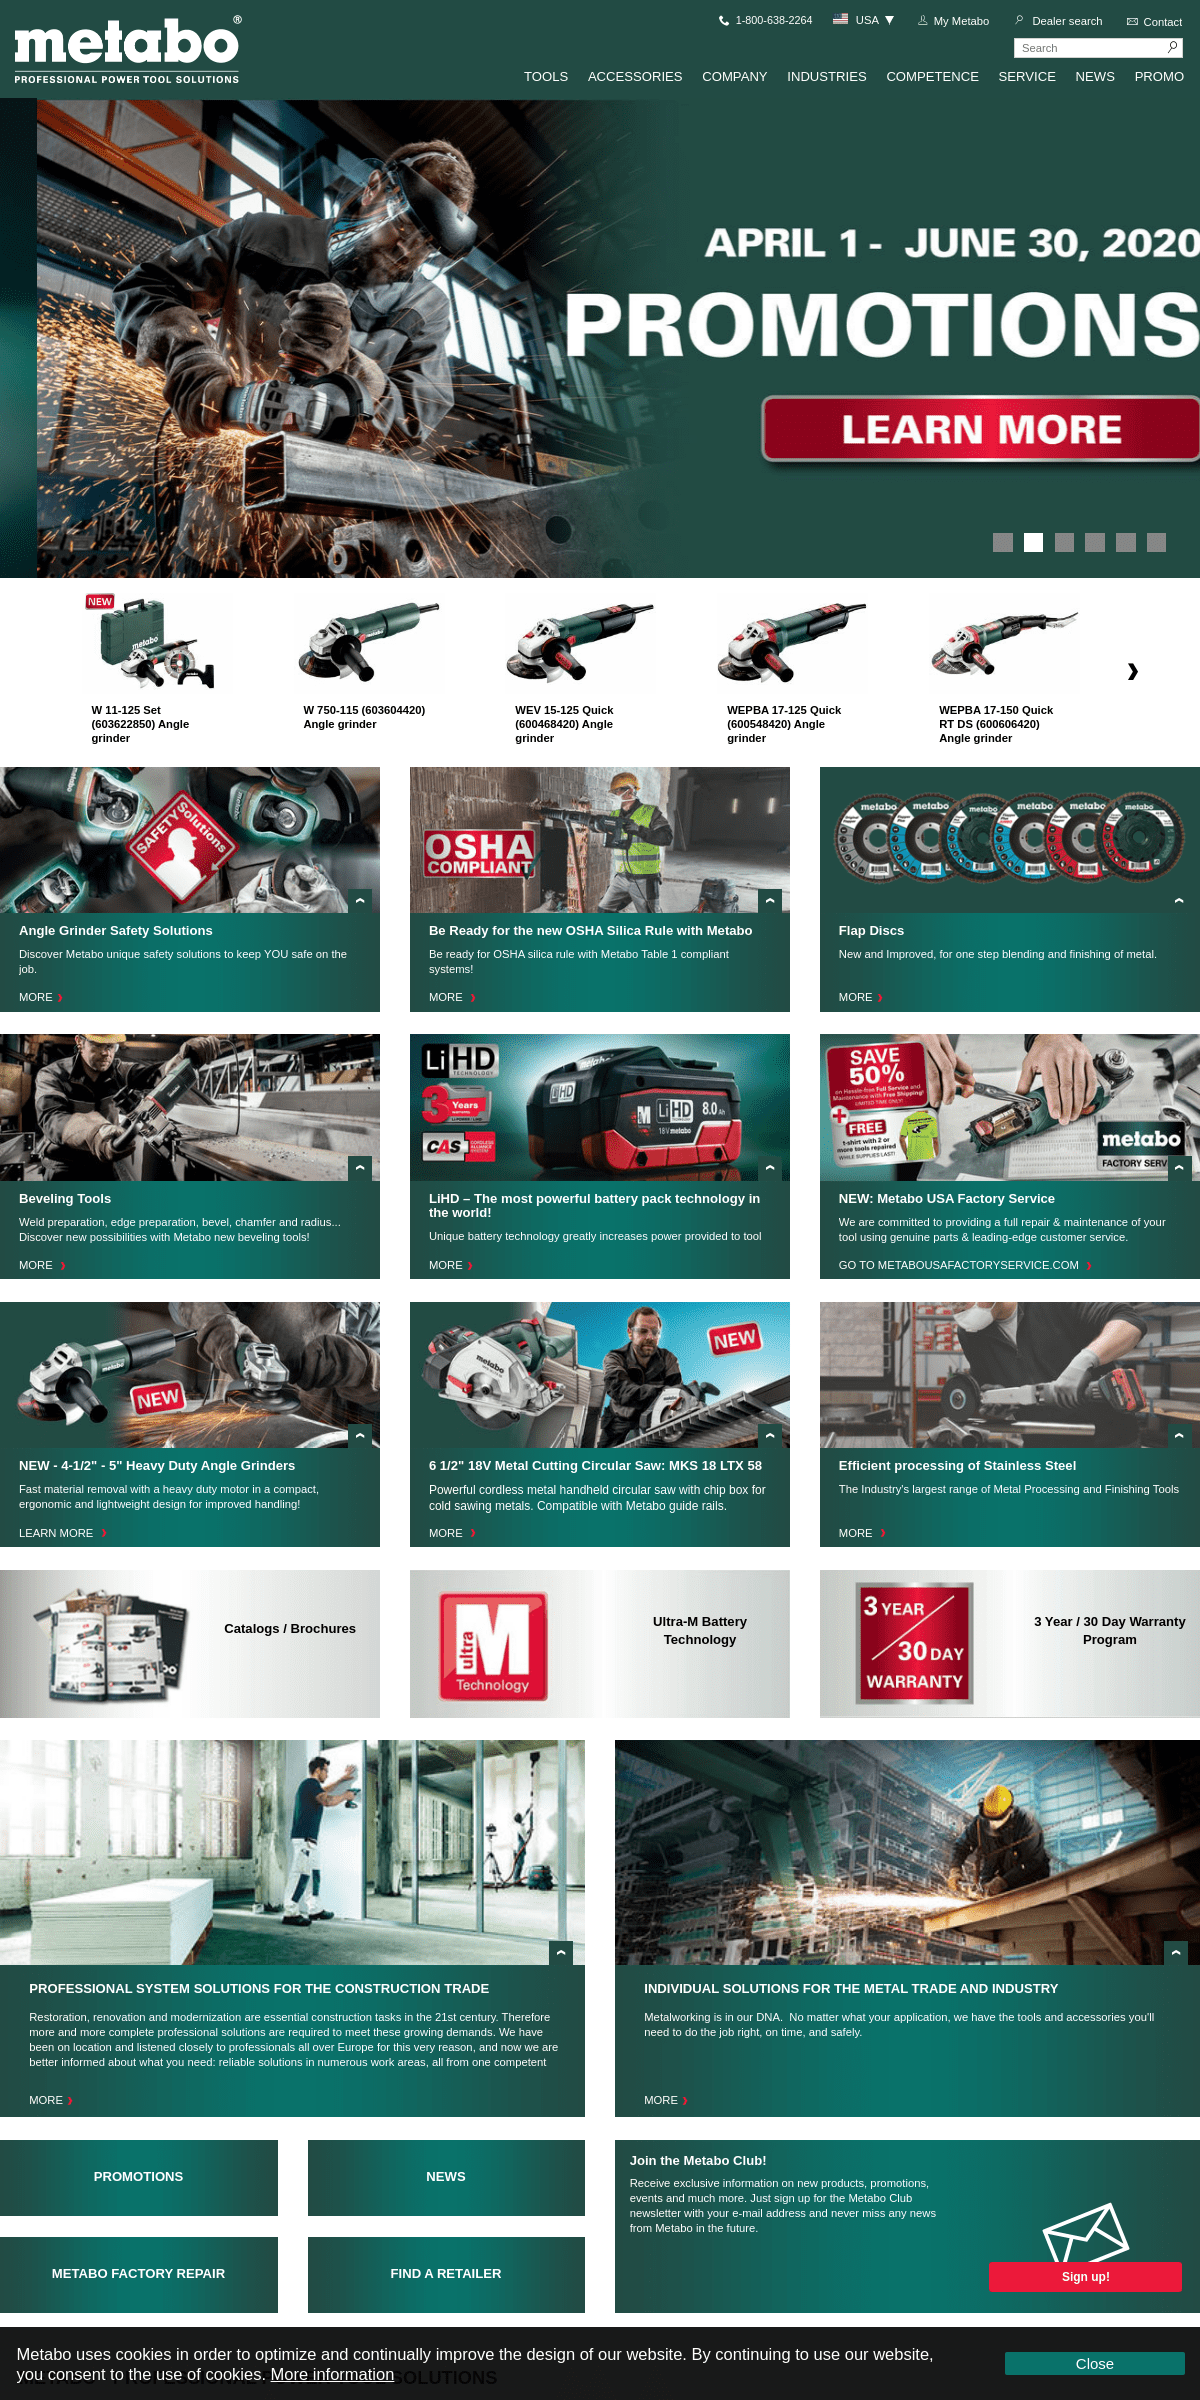 A complete backup of metabo.com